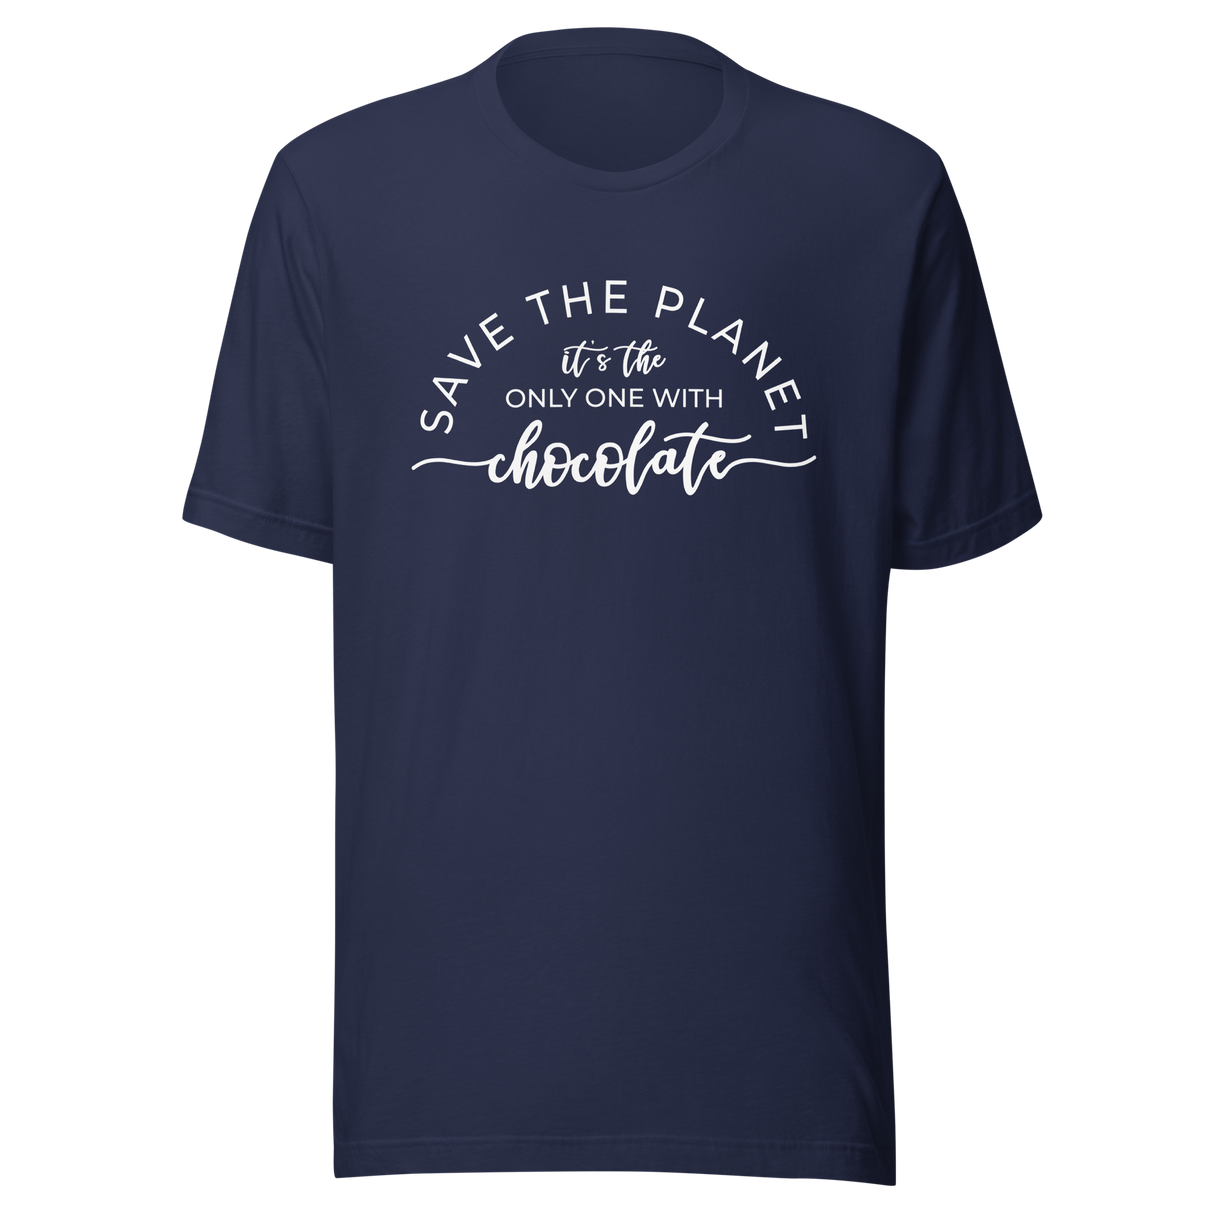 save-the-planet-its-the-only-one-with-chocolate-earth-tee-life-t-shirt-planet-tee-t-shirt-tee#color_navy